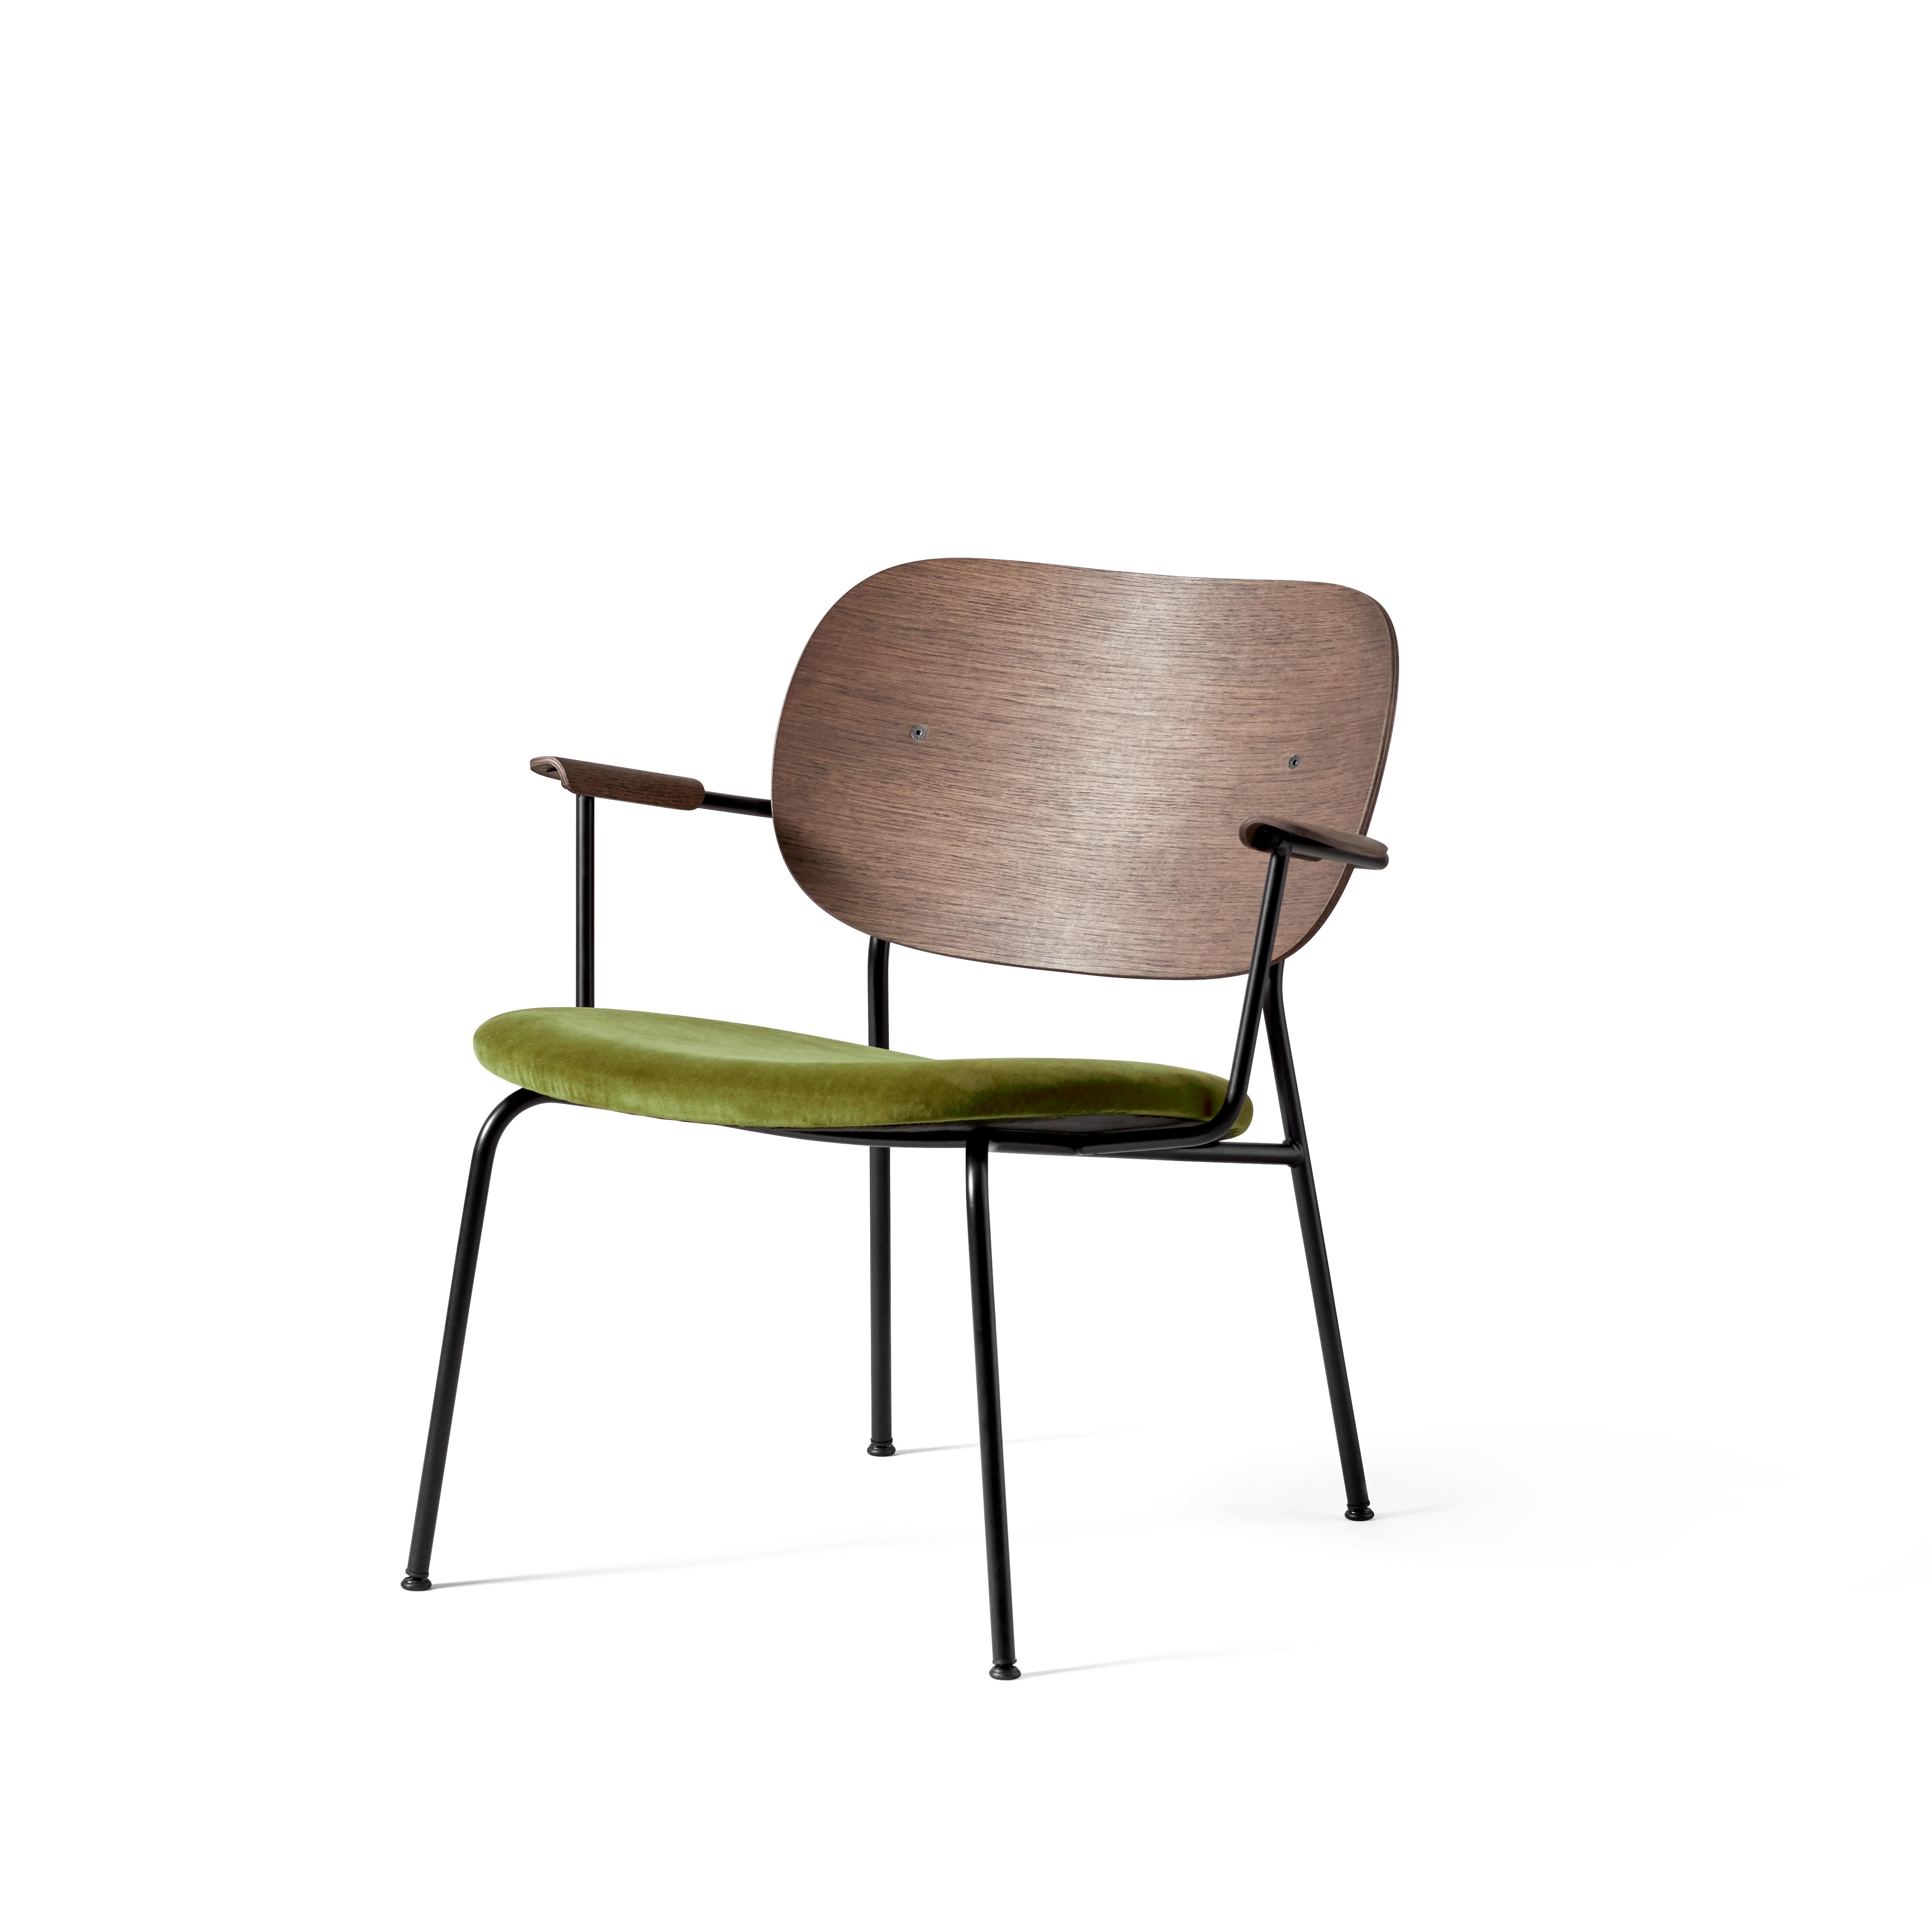 Together, mutually, in common: the words that define the prefix ‘co-’ are at the heart of our new Co Chair design. Conceived in collaboration with The Office Group and Norm Architects, the multifunctional chair adapts to a wide range of needs and